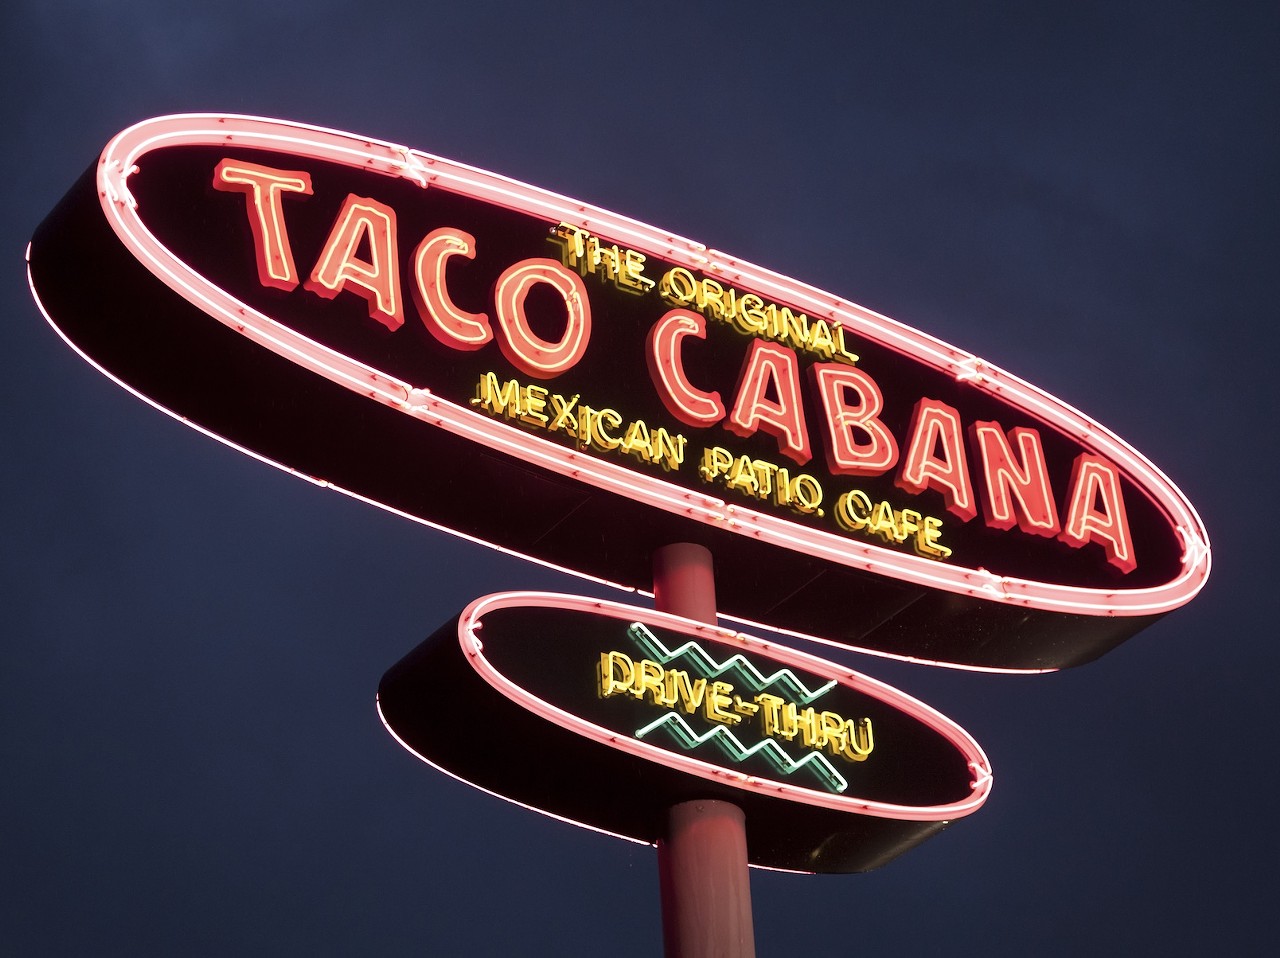 Taco Cabana
Multiple Locations, tacocabana.com
Whether you’re part of the camp that thinks Taco Cabana’s eats are the best, or that the San Antonio-based chain wouldn’t know good Mexican food if it hit them in the face, we can all agree on one thing: TC remains a go-to spot for late-night munchies, which makes it an automatic favorite for many locals.